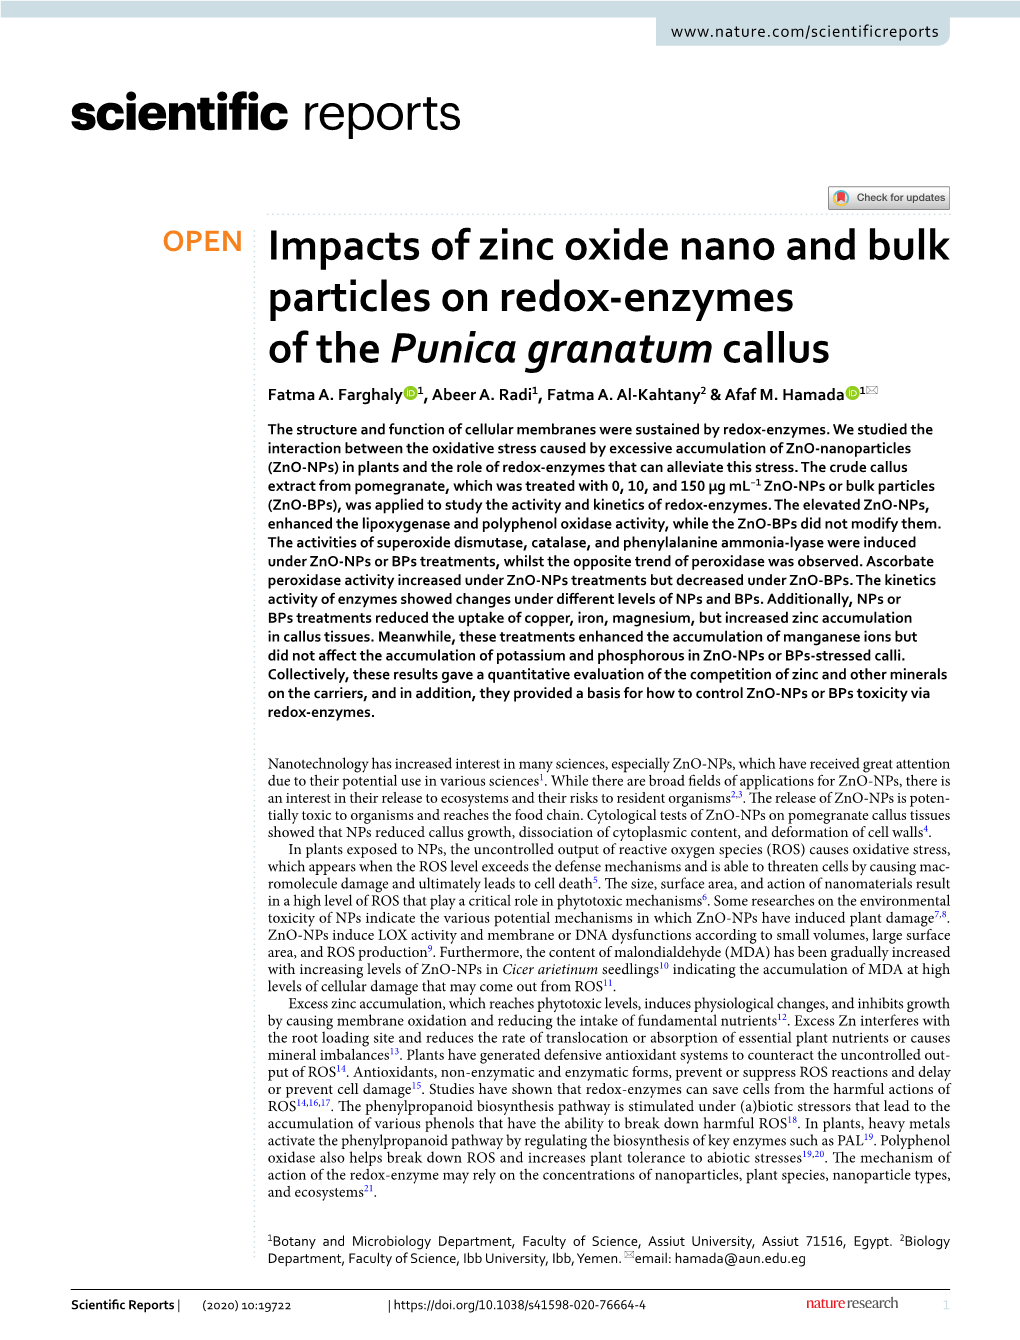 Impacts of Zinc Oxide Nano and Bulk Particles on Redox‑Enzymes of the Punica Granatum Callus Fatma A